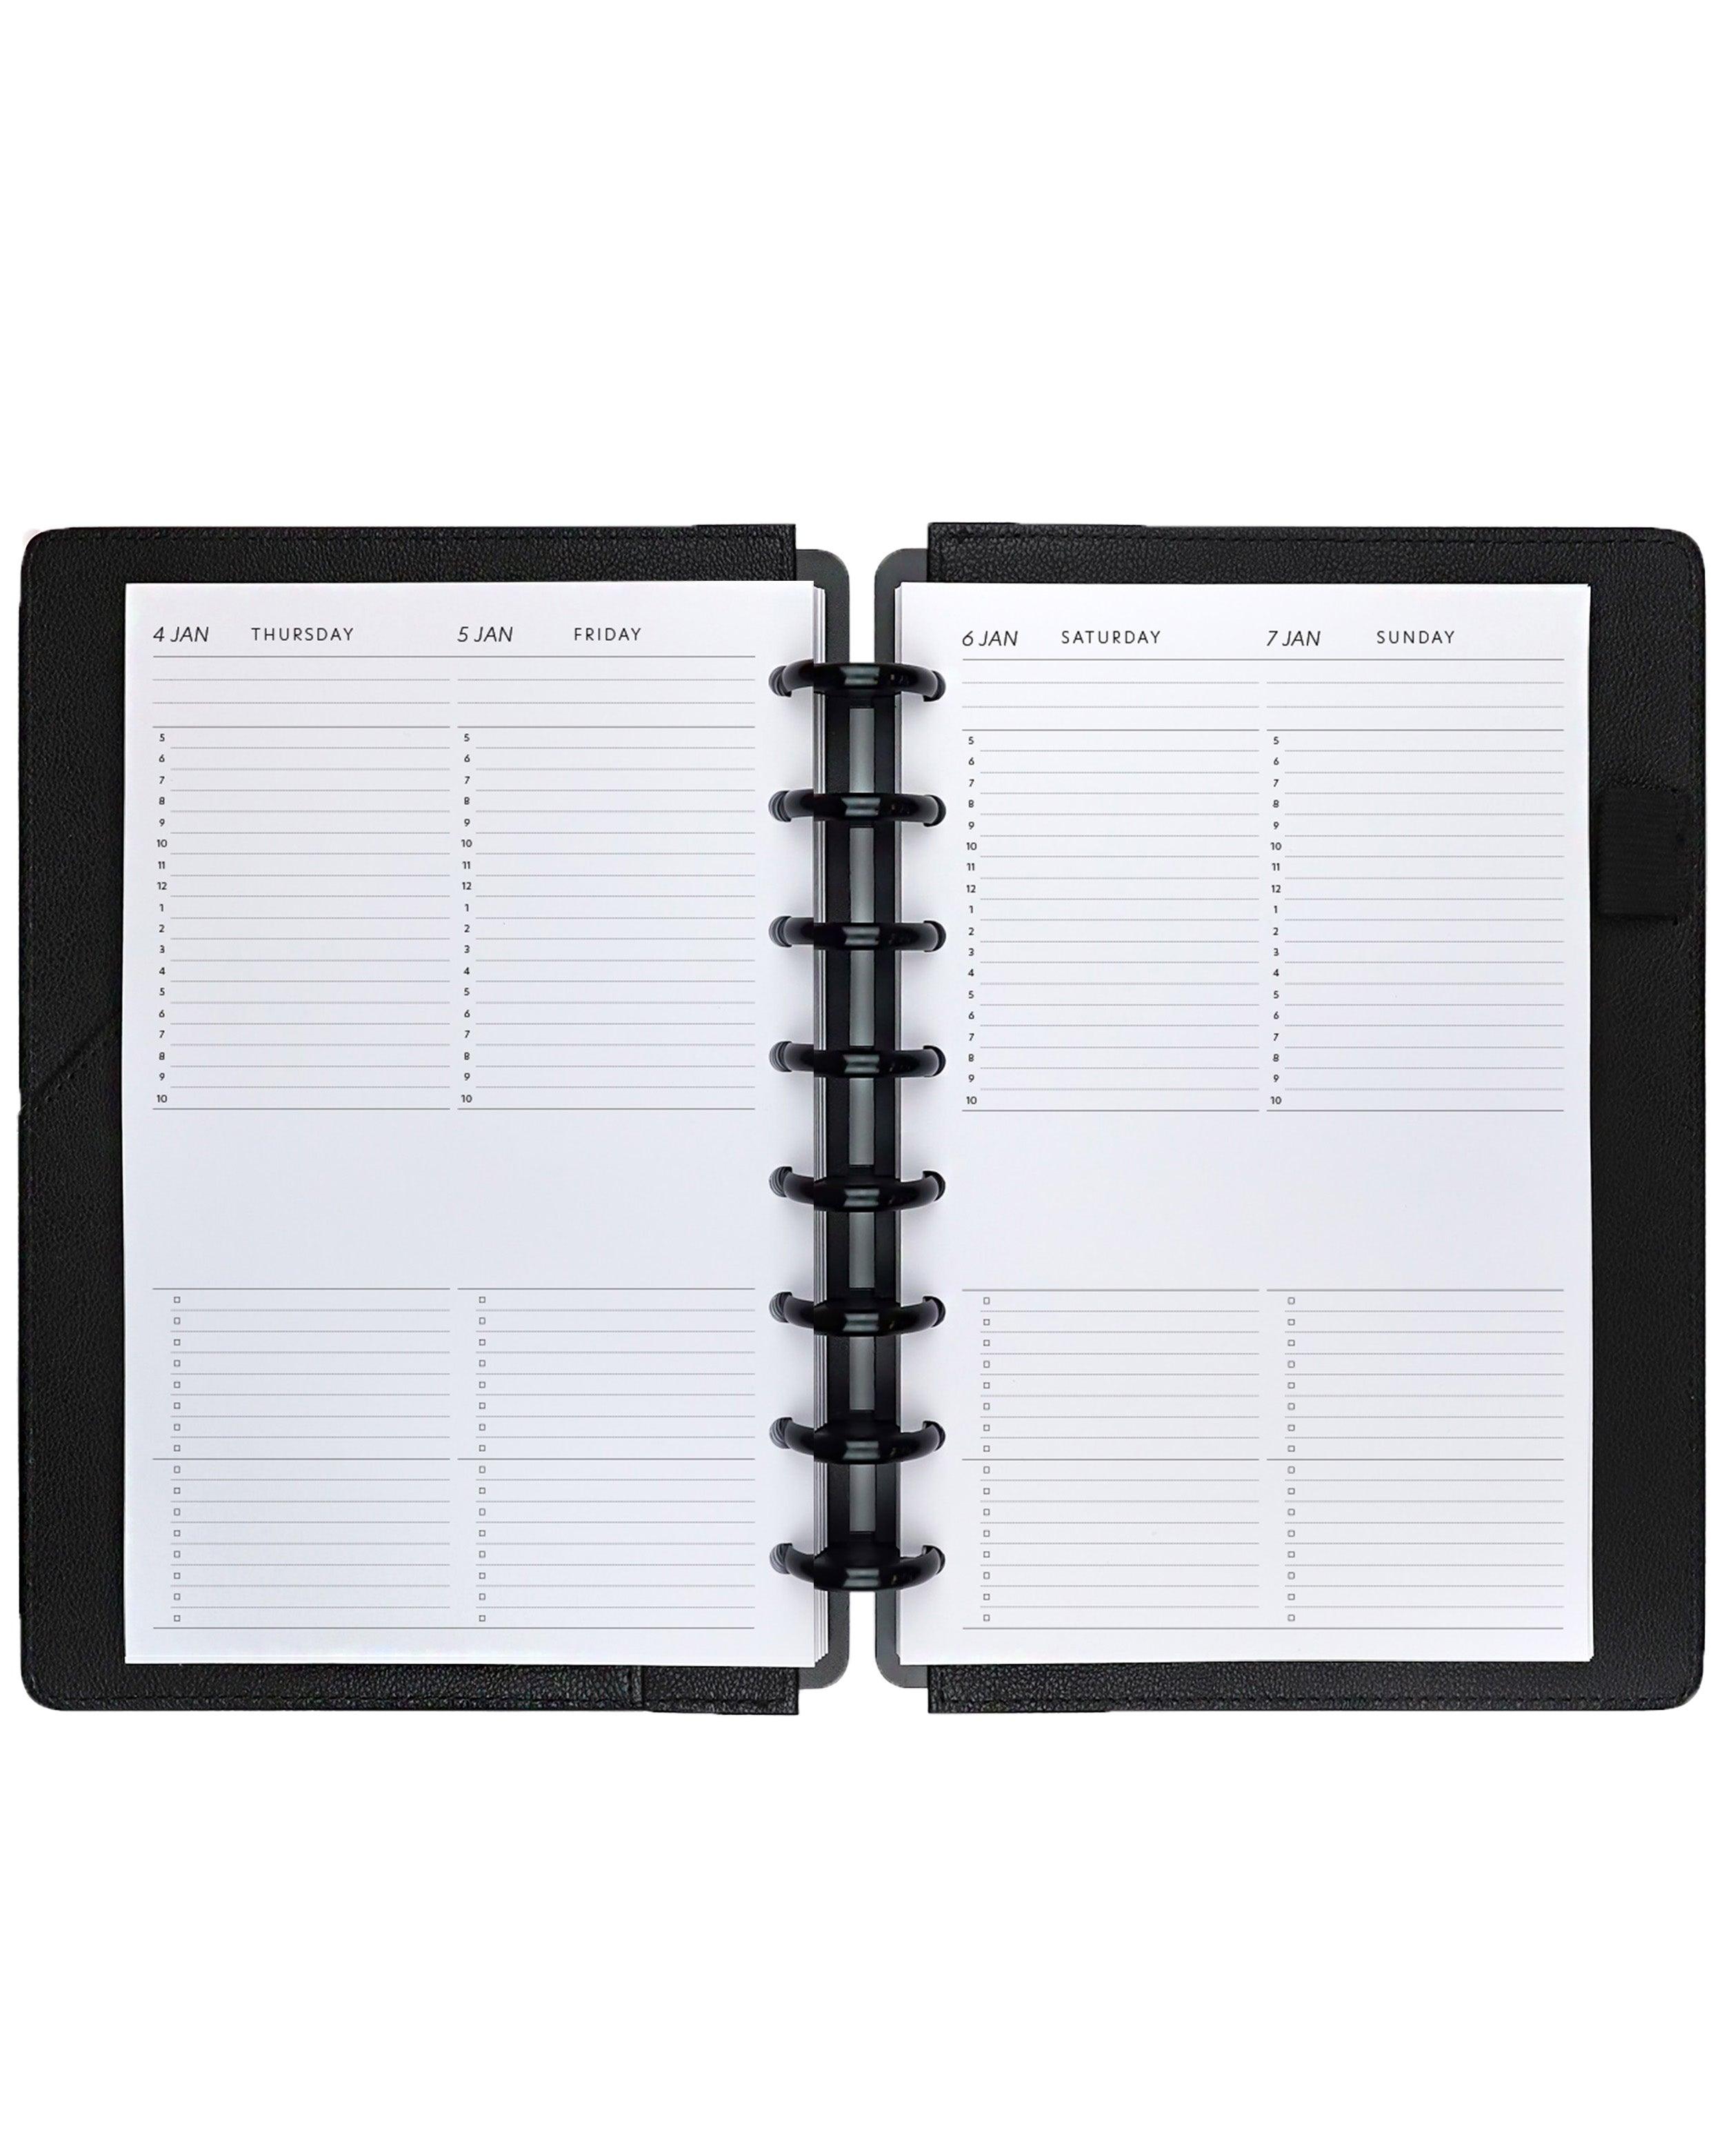 Jet hefboom effect Daily Planner Refill Pages | Dated | Jane's Agenda®